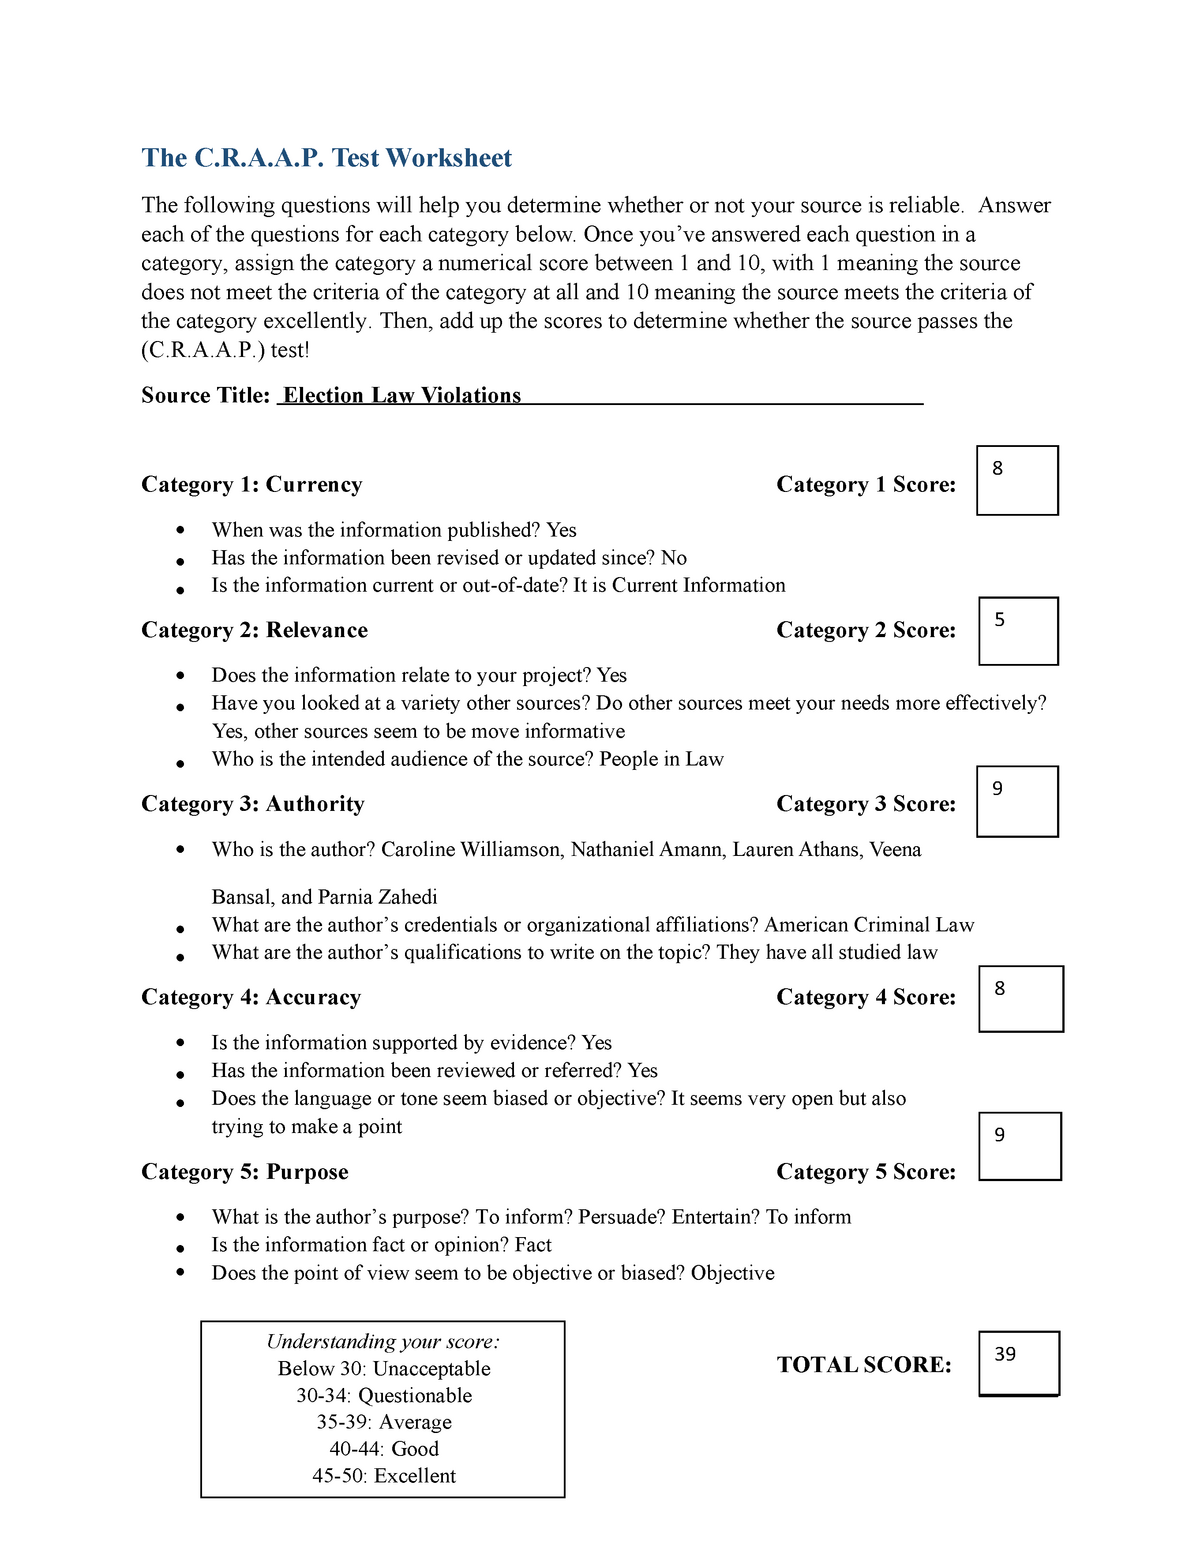 the-craap-ws-revised-the-c-r-a-test-worksheet-the-following-questions-will-help-you-determine